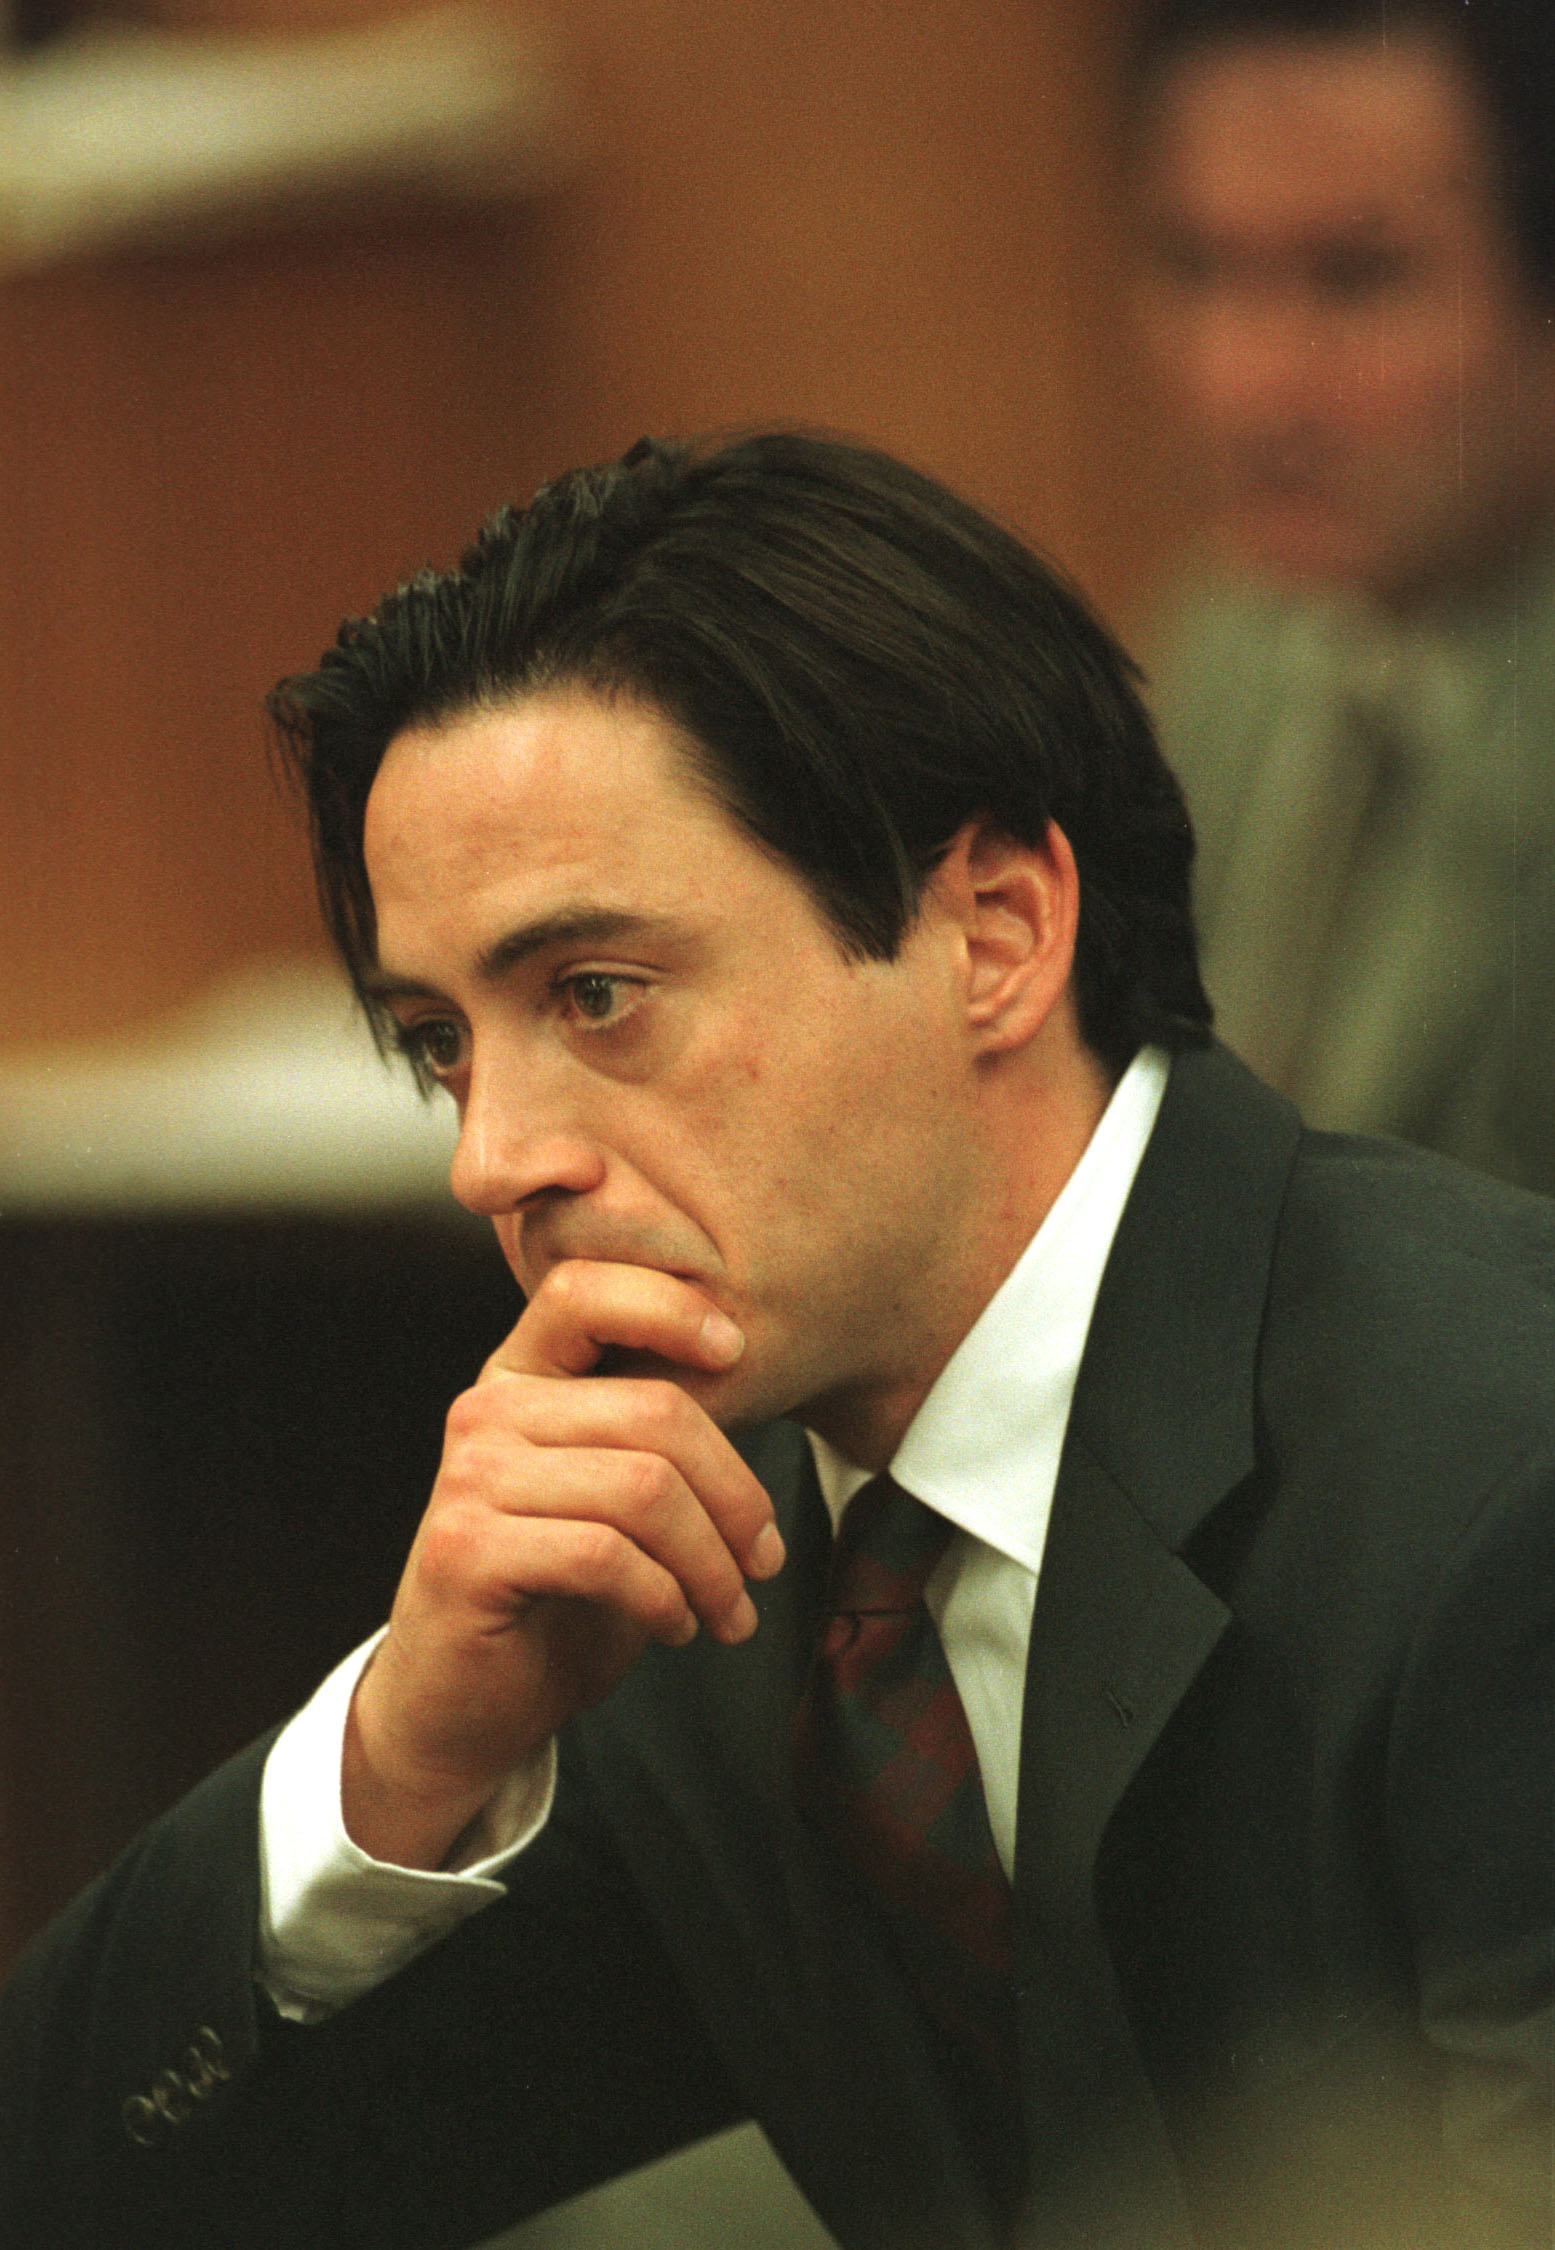 Robert Downey Jr. as he was being sentenced for jail time for charges of cocaine and speed possesion at a courtroom in Malibu, California, on December 8, 1997 | Source: Getty Images